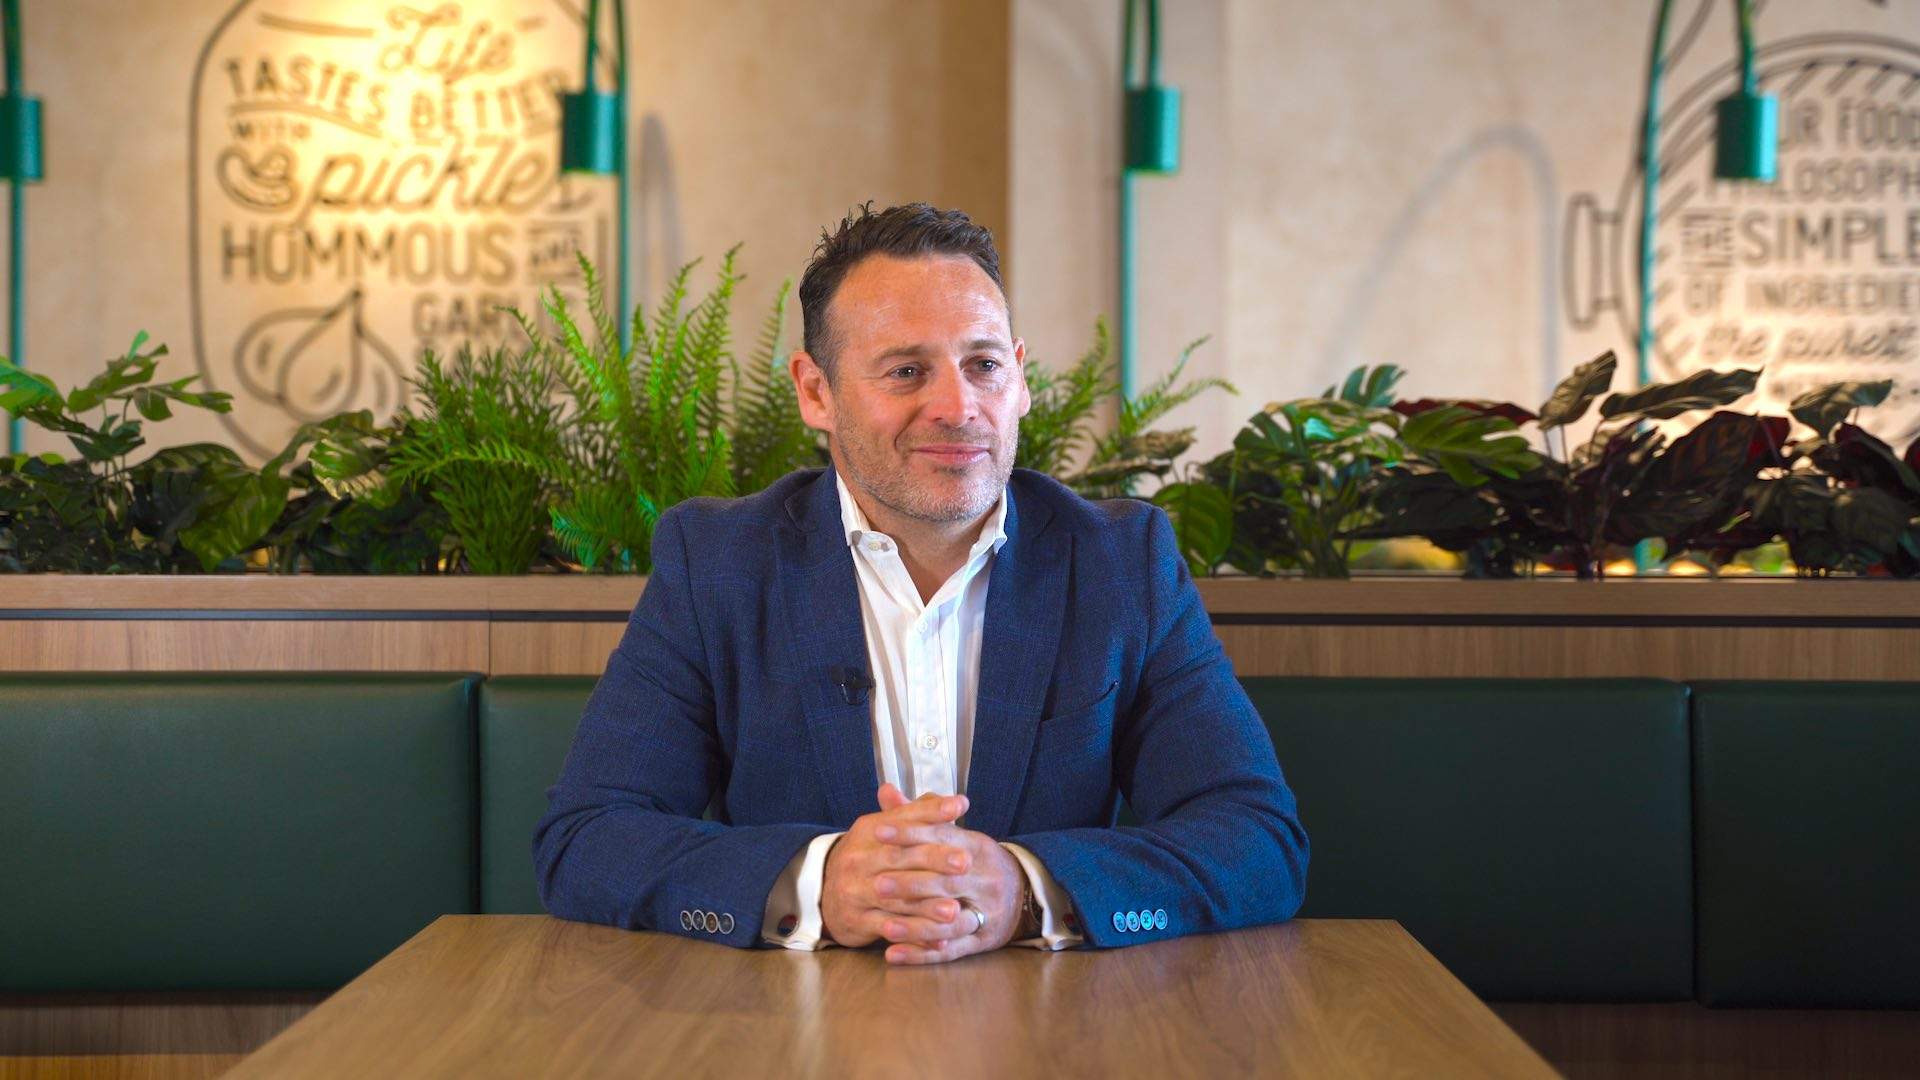 Charcoal Chicken, Authenticity and a Cult Following: El Jannah CEO Brett Houldin on Succeeding in the Hospitality Industry